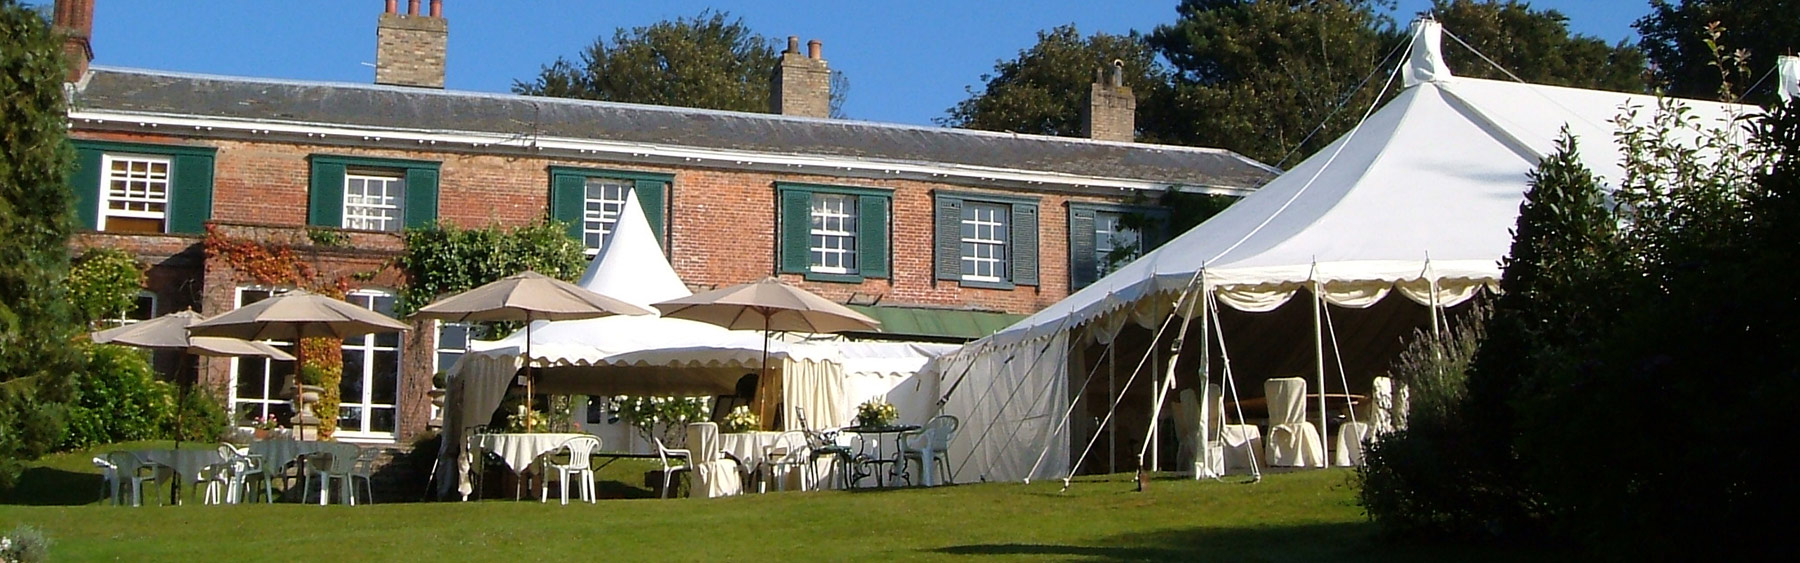 Bespoke Marquee Projects